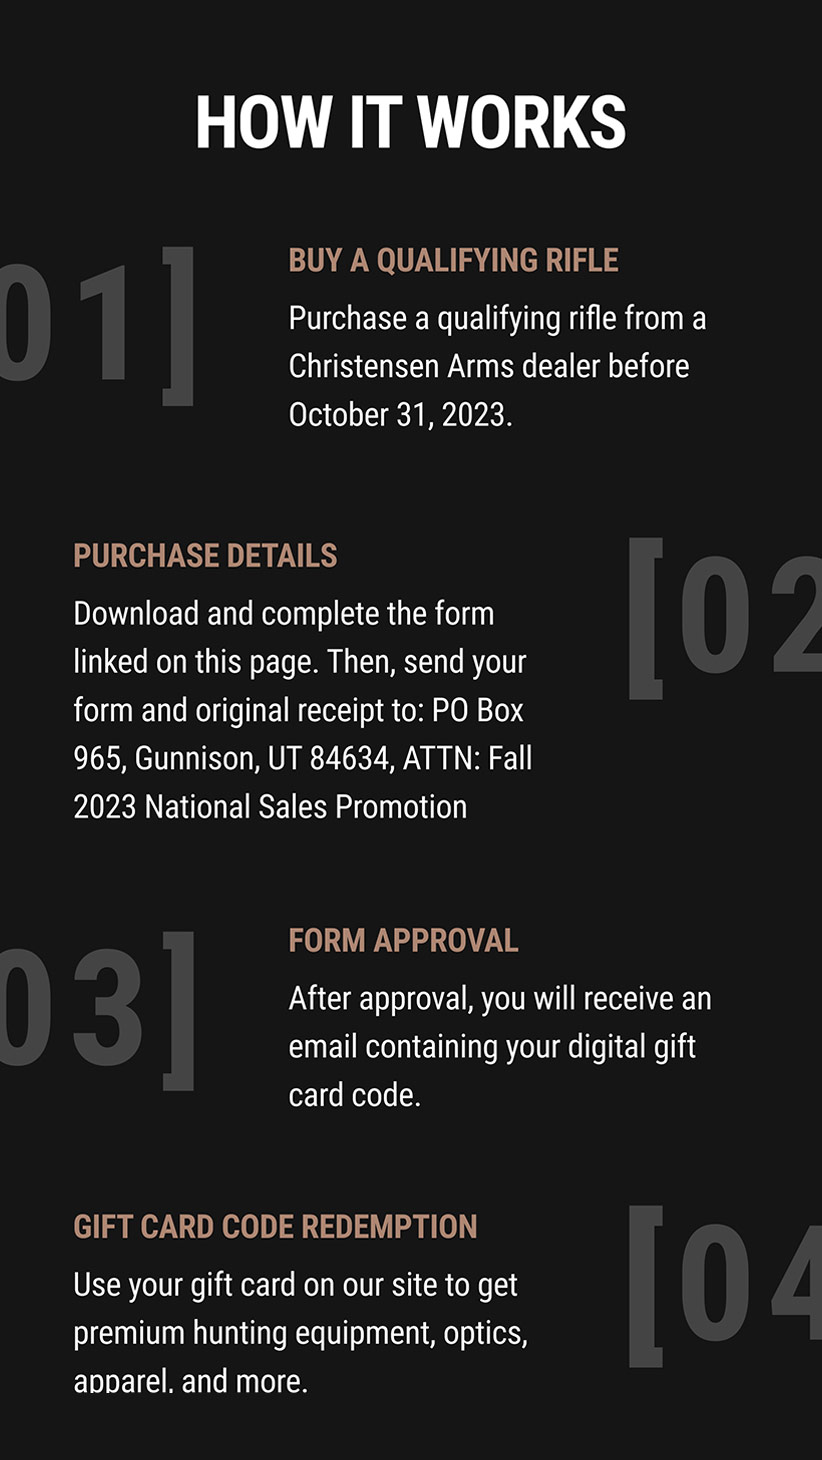 How to take advantage of the Christensen Arms Fall 2023 National Promo